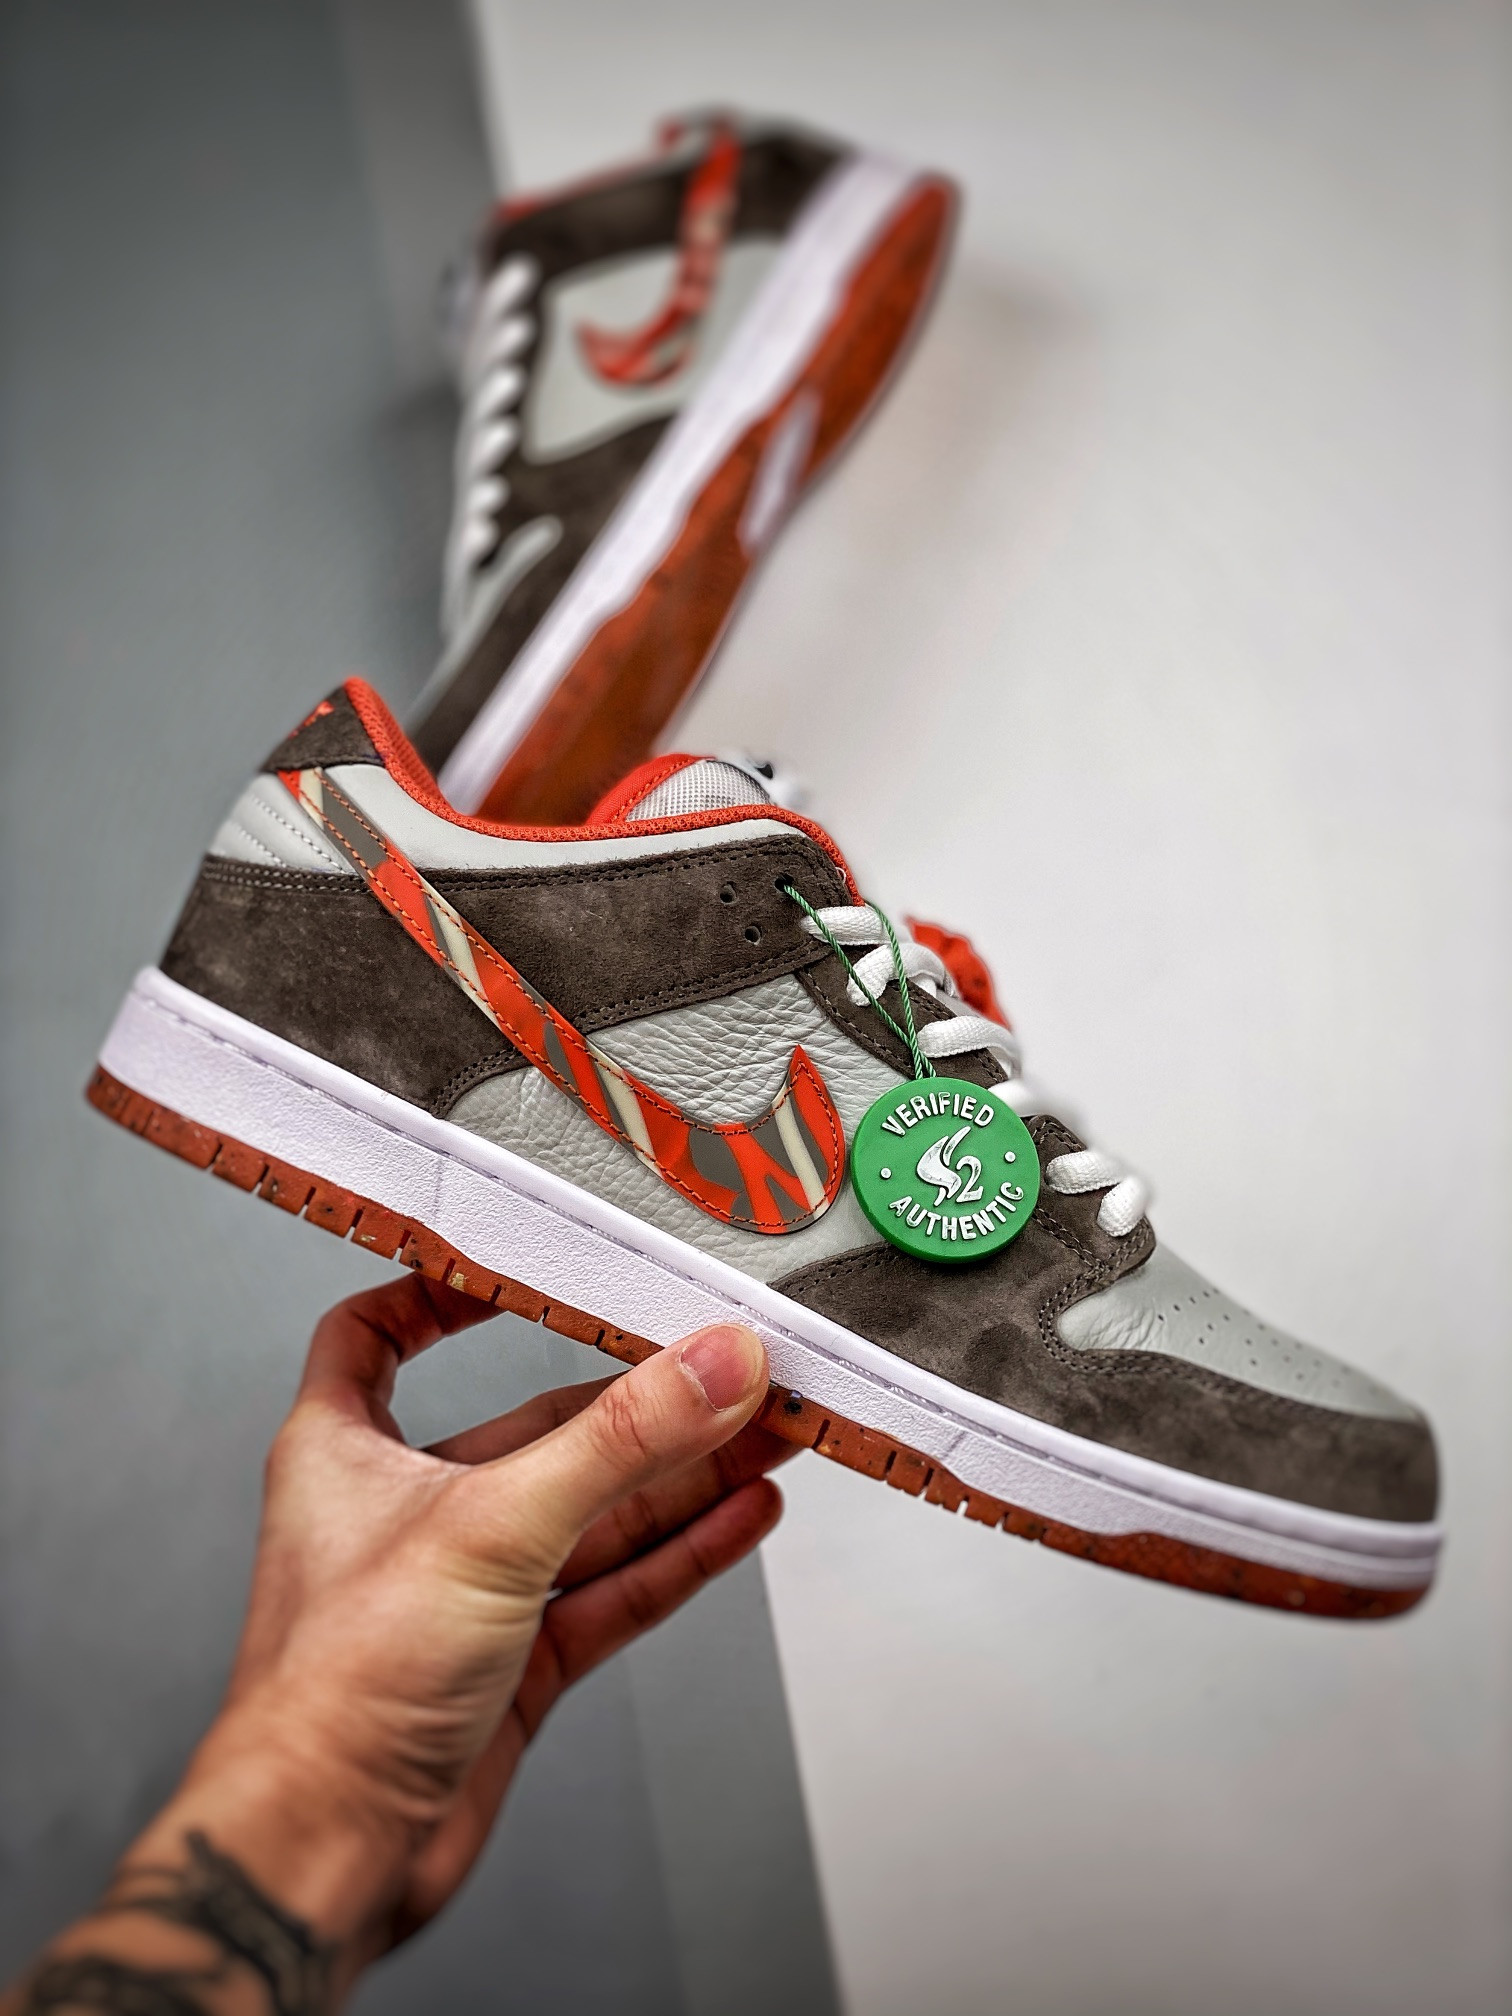 Crushed D.C. X Nike SB Dunk Low White Orange-Brown DH7782-001 For Sale